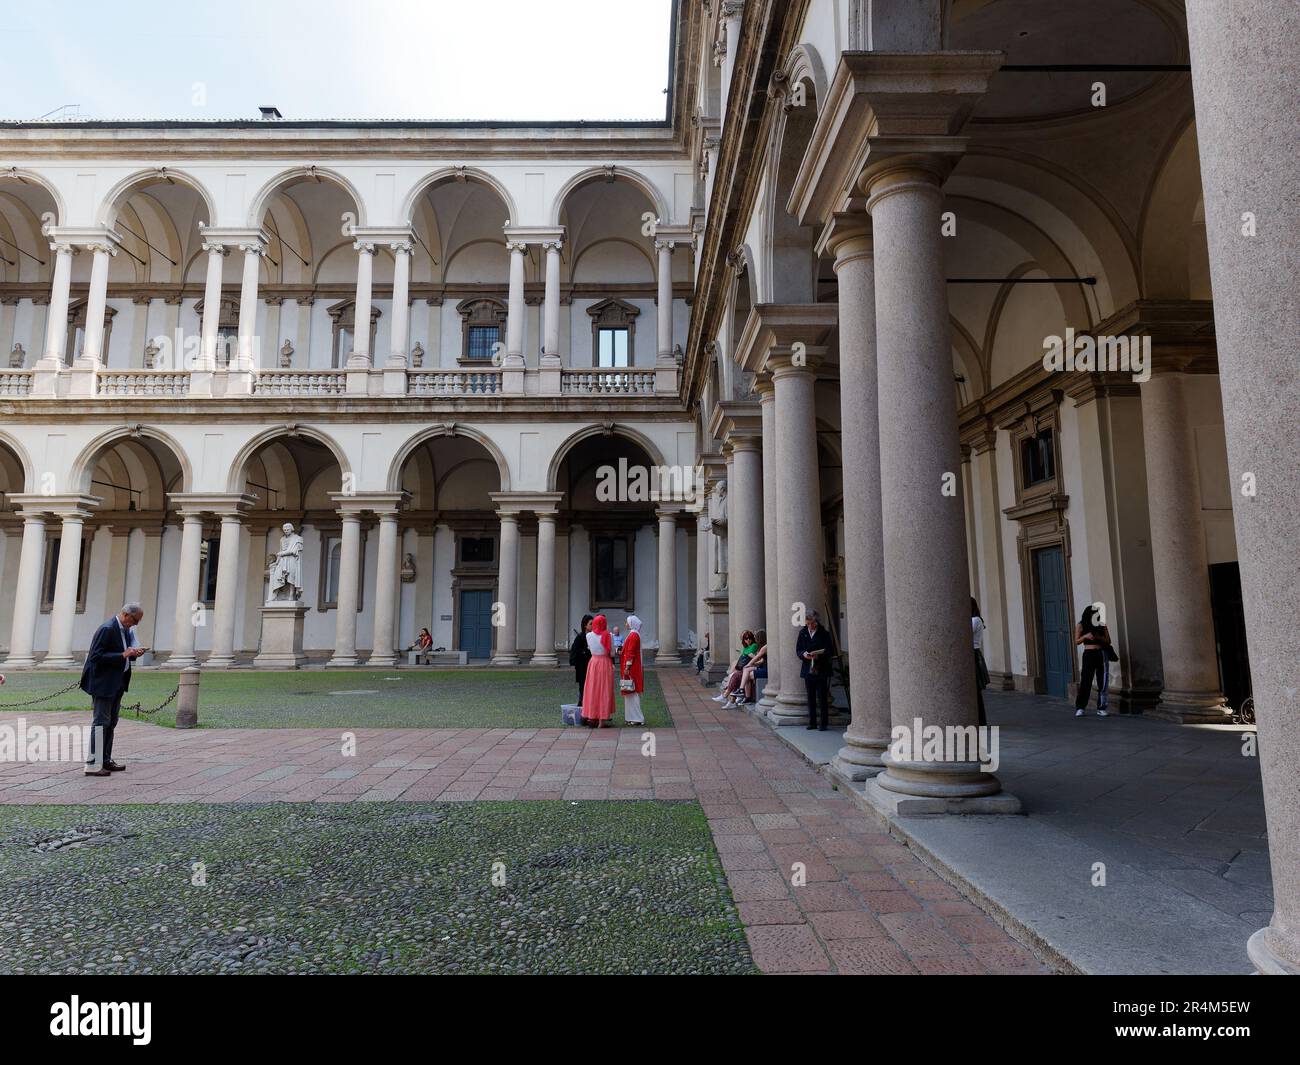 Tourists in Palazzo di Brera (Brera Palace) courtyard, city of Milan, Lombardy, Italy. The Palace houses the famous Pinacoteca (Art Gallery) Stock Photo